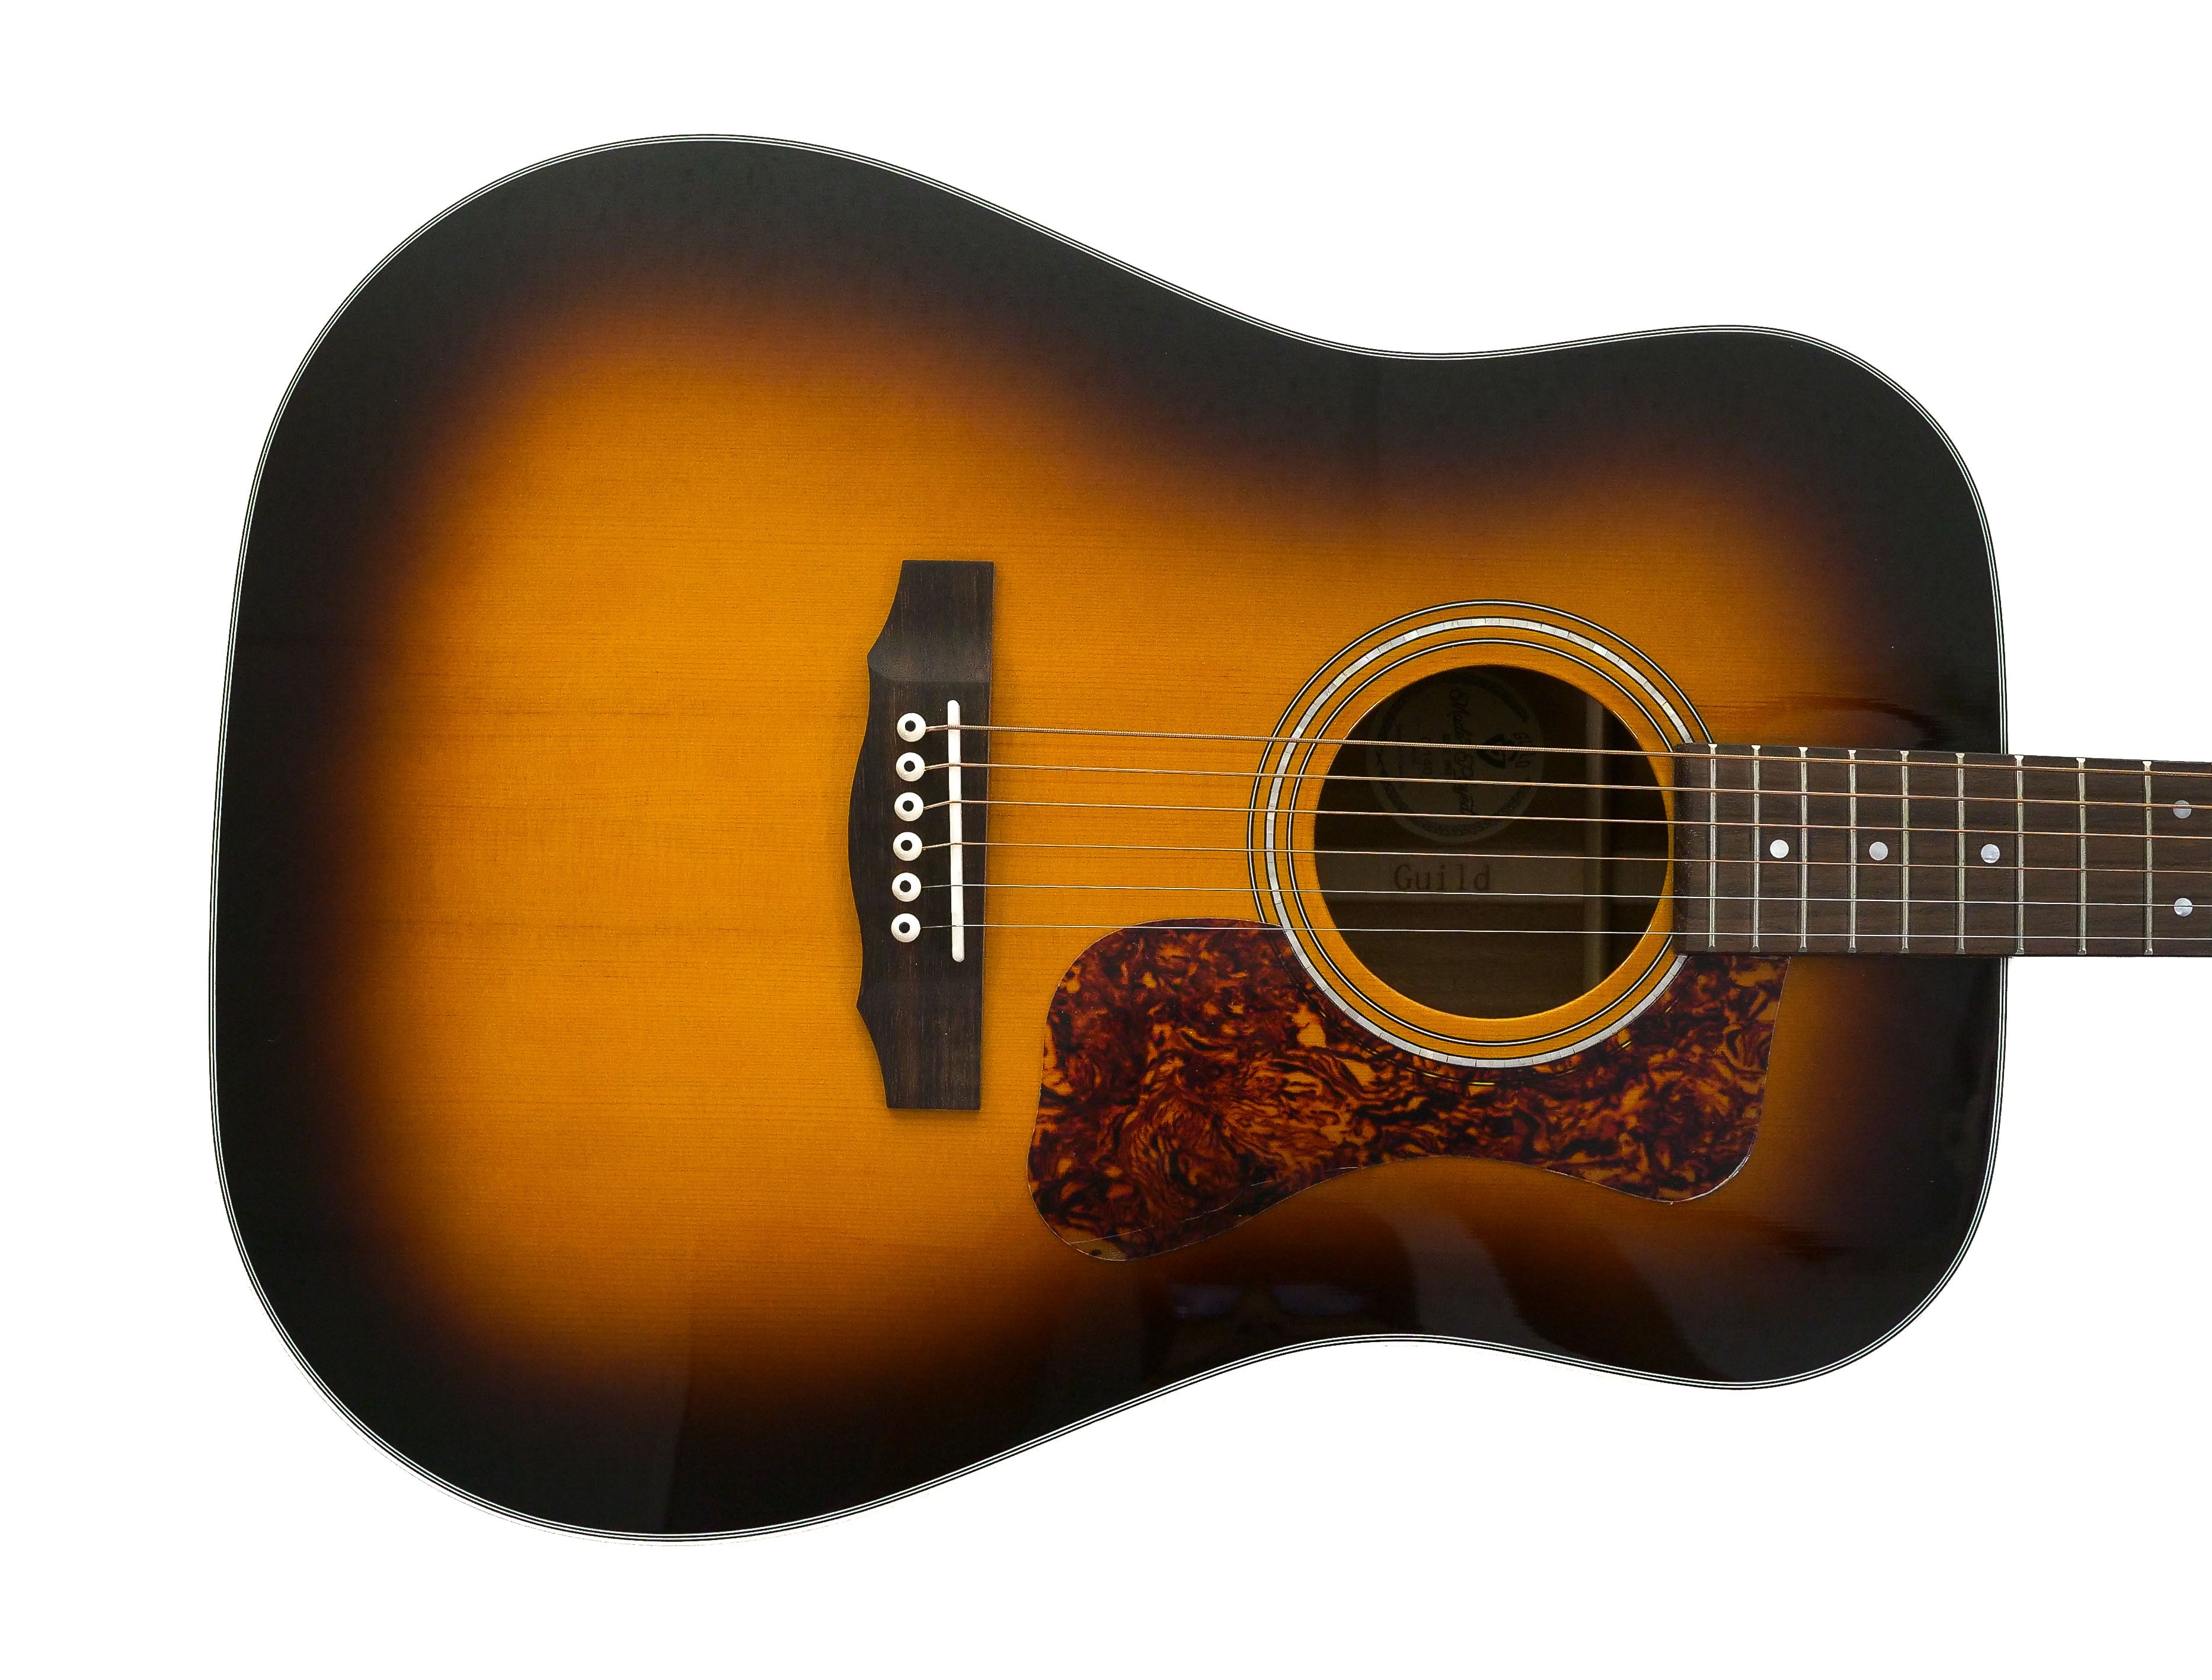 Guild D-140 ATB Acoustic Guitar "Wild Mustang"